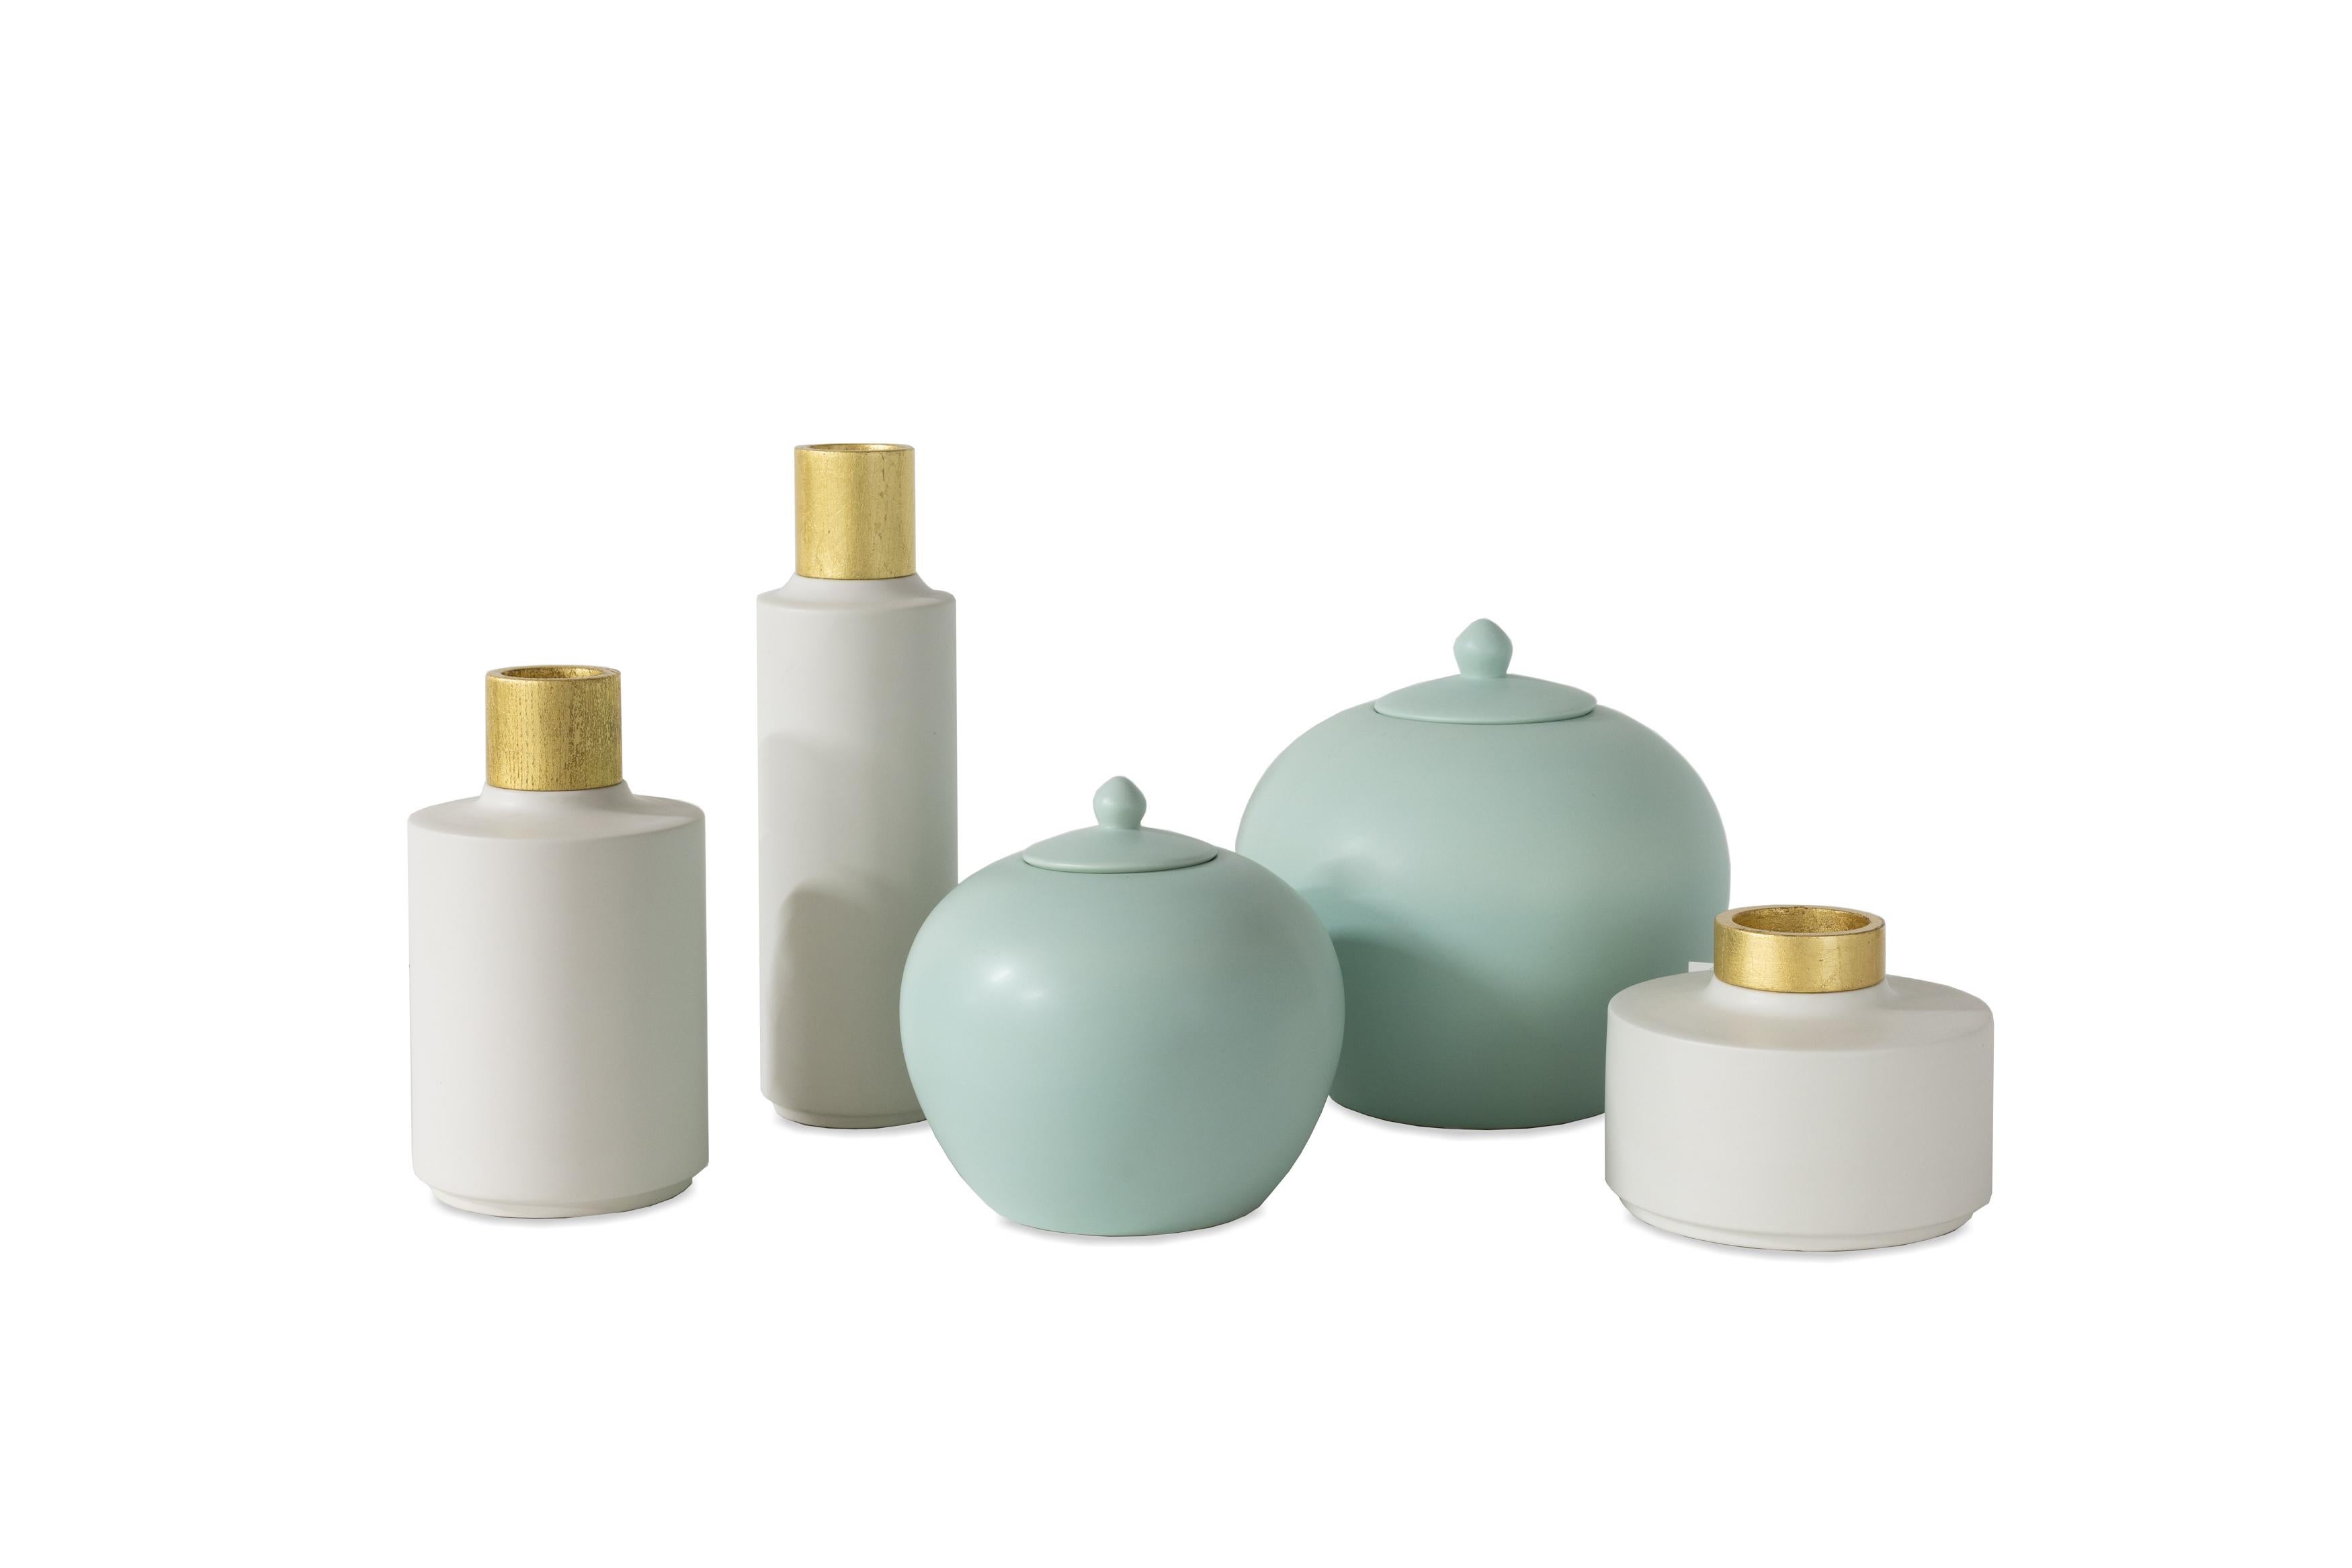 Portuguese Set/5 Jars & Pots, White & Mint Green, Handmade in Portugal by Lusitanus Home For Sale